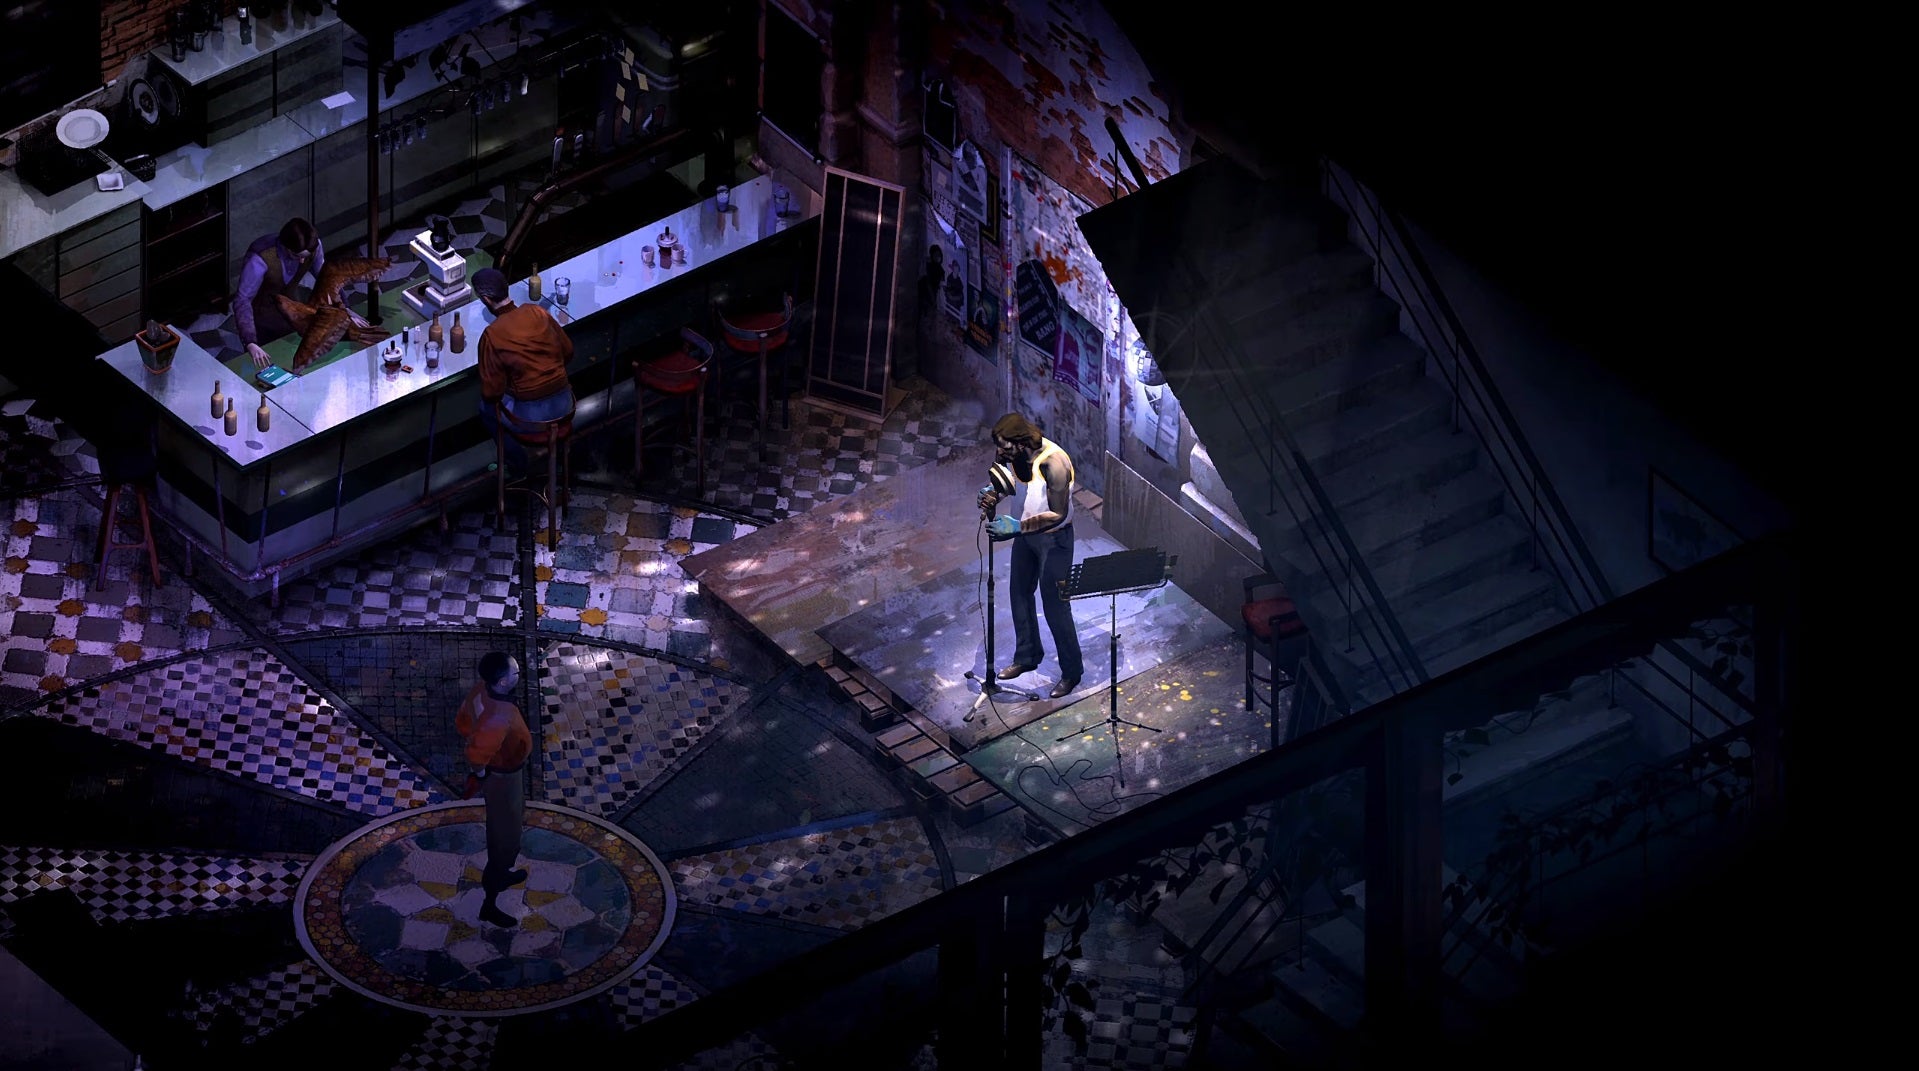 Disco Elysium - The main character singing on a stage beneath a blue light while patrons of the Whirling In Rags bar listen.